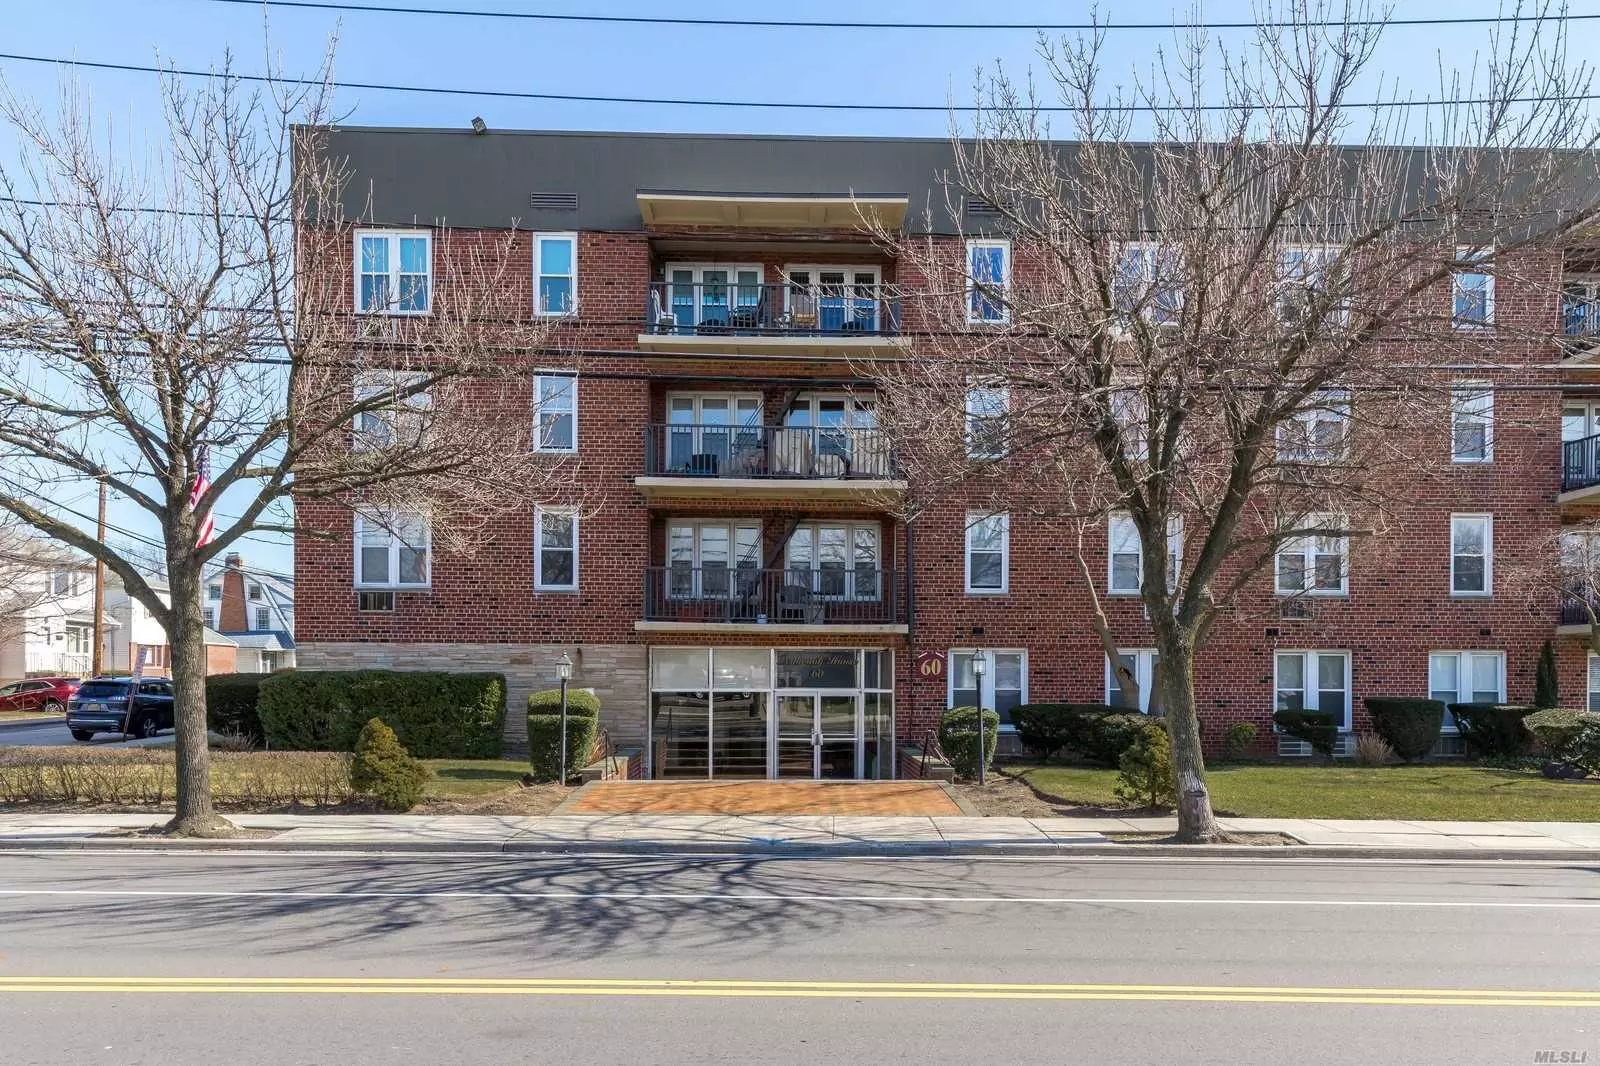 A Must See! This Beautiful 2 BR Unit Will Check All Your Boxes. Huge Master Bedroom, Brand New Renovated Kitchen, Close To The Train & Highway Which Make For An Easy Commute.